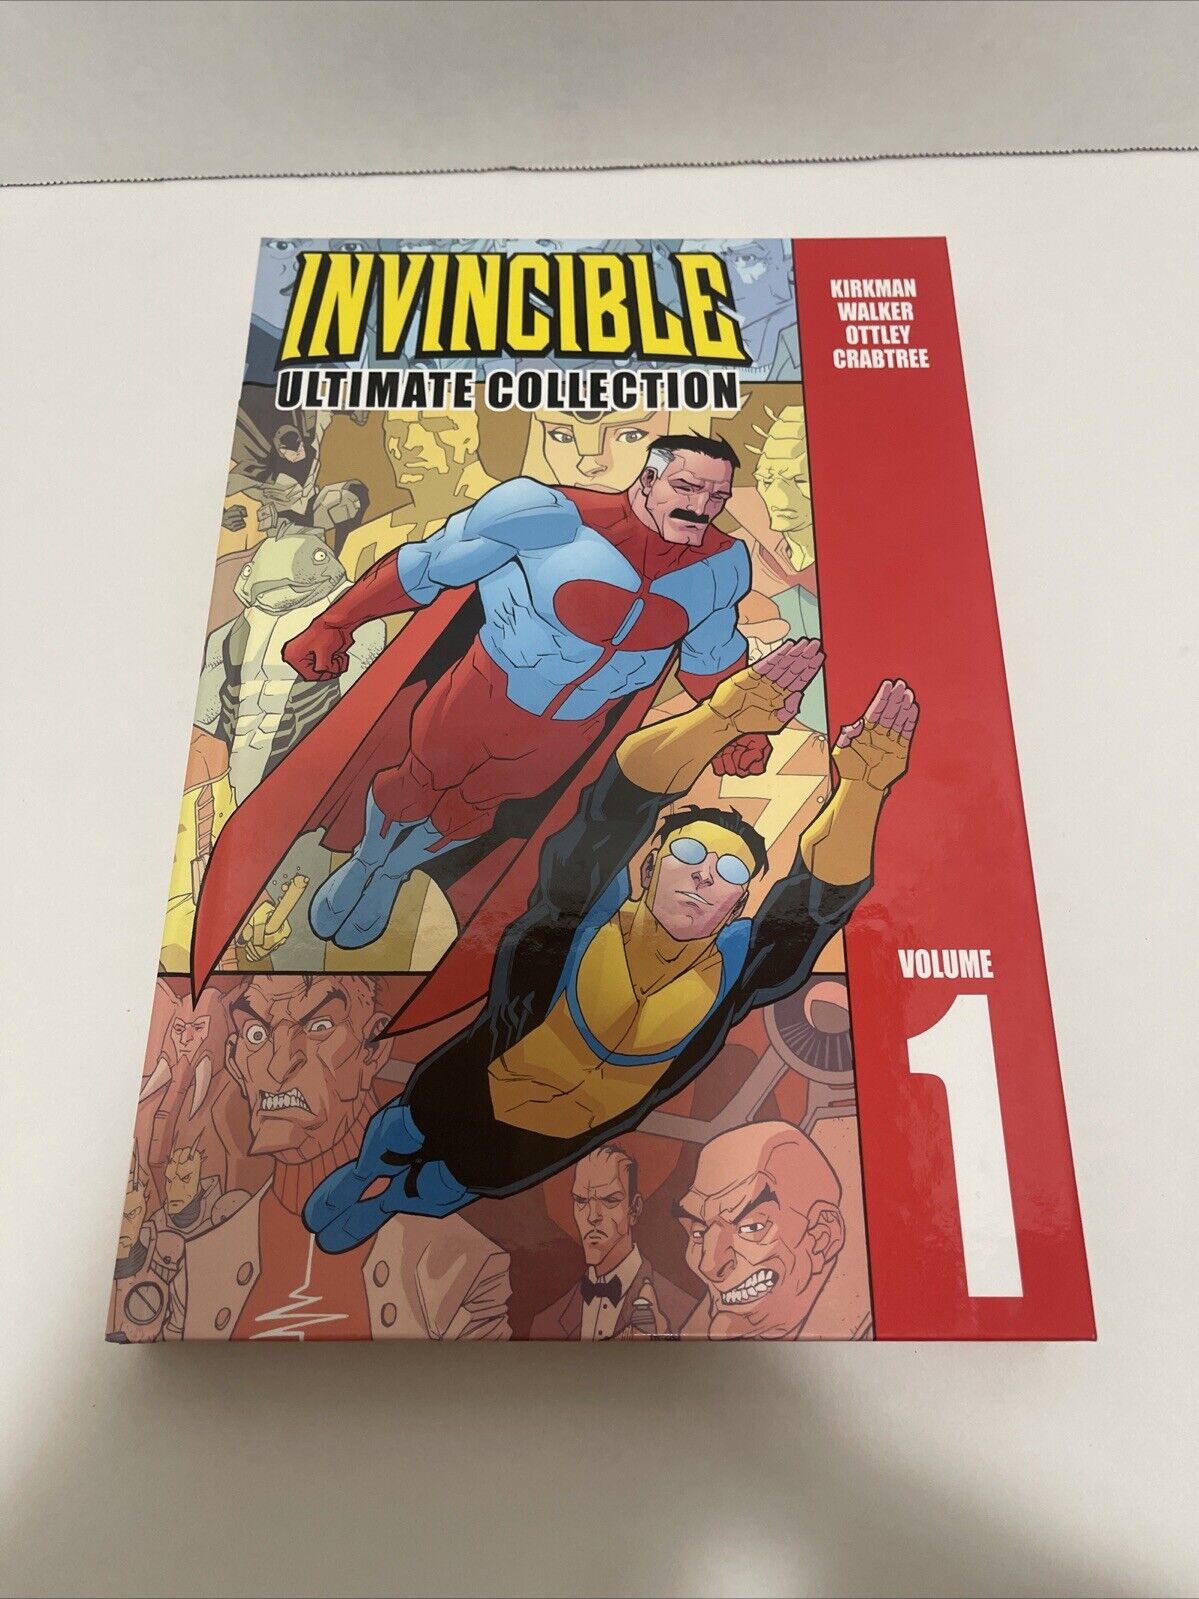 Invincible Ultimate Collection Vol 1. 6th Printing.